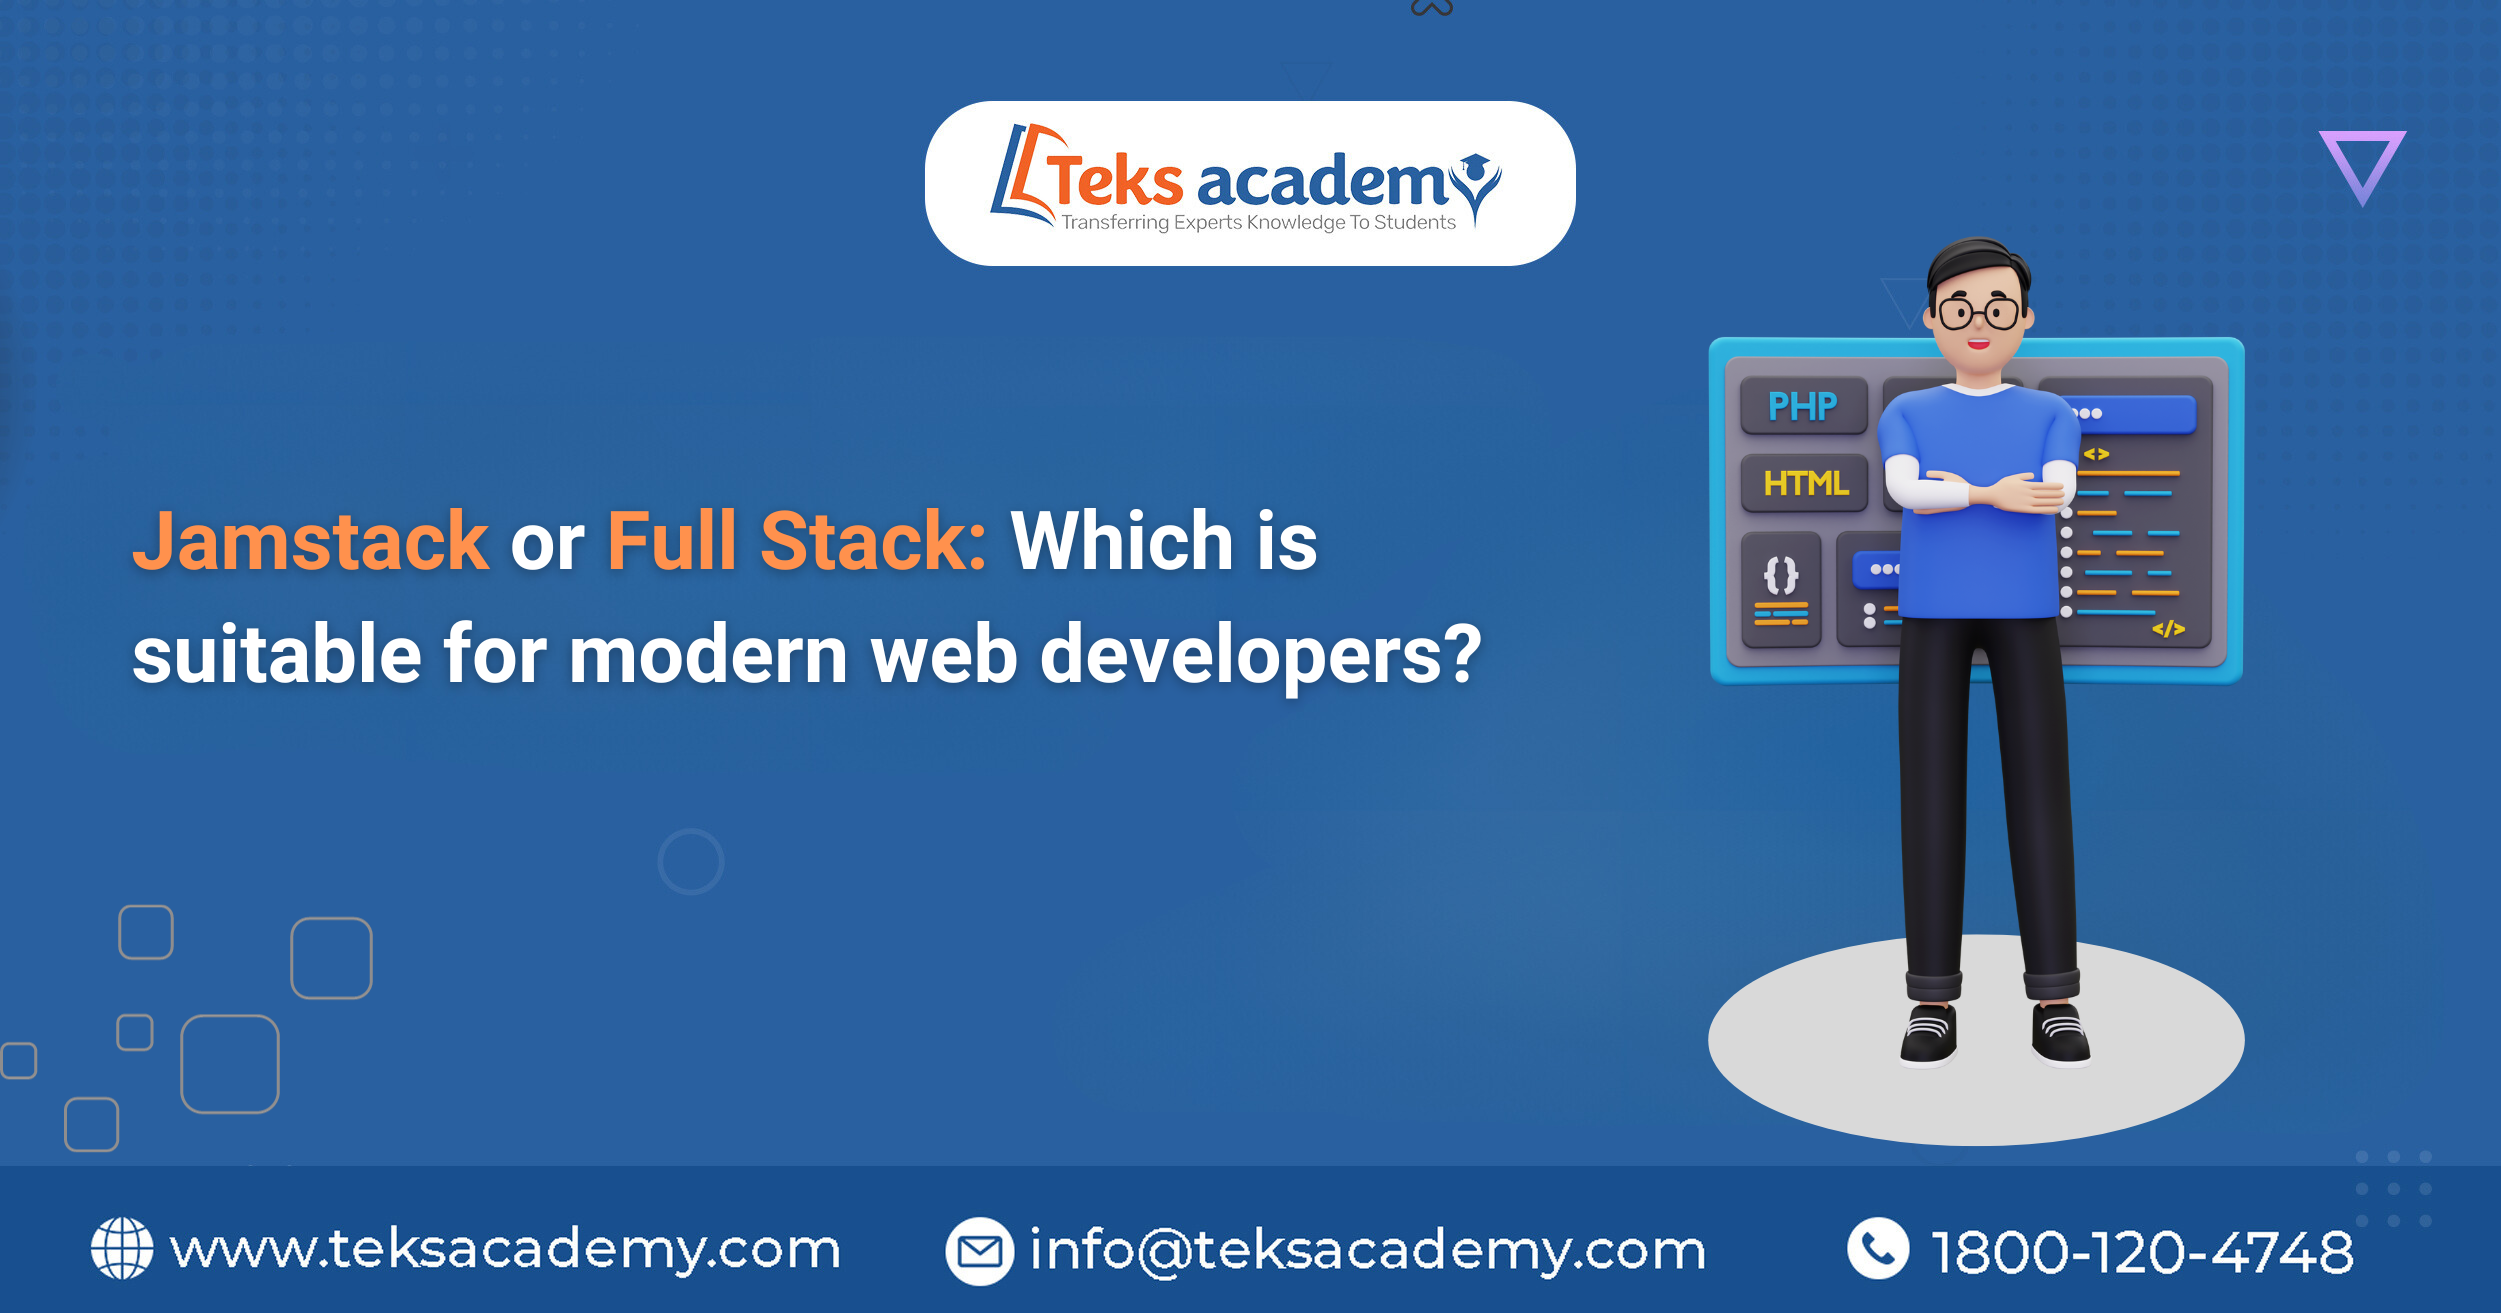 Jamstack or Full stack: Which is suitable for modern web developers?